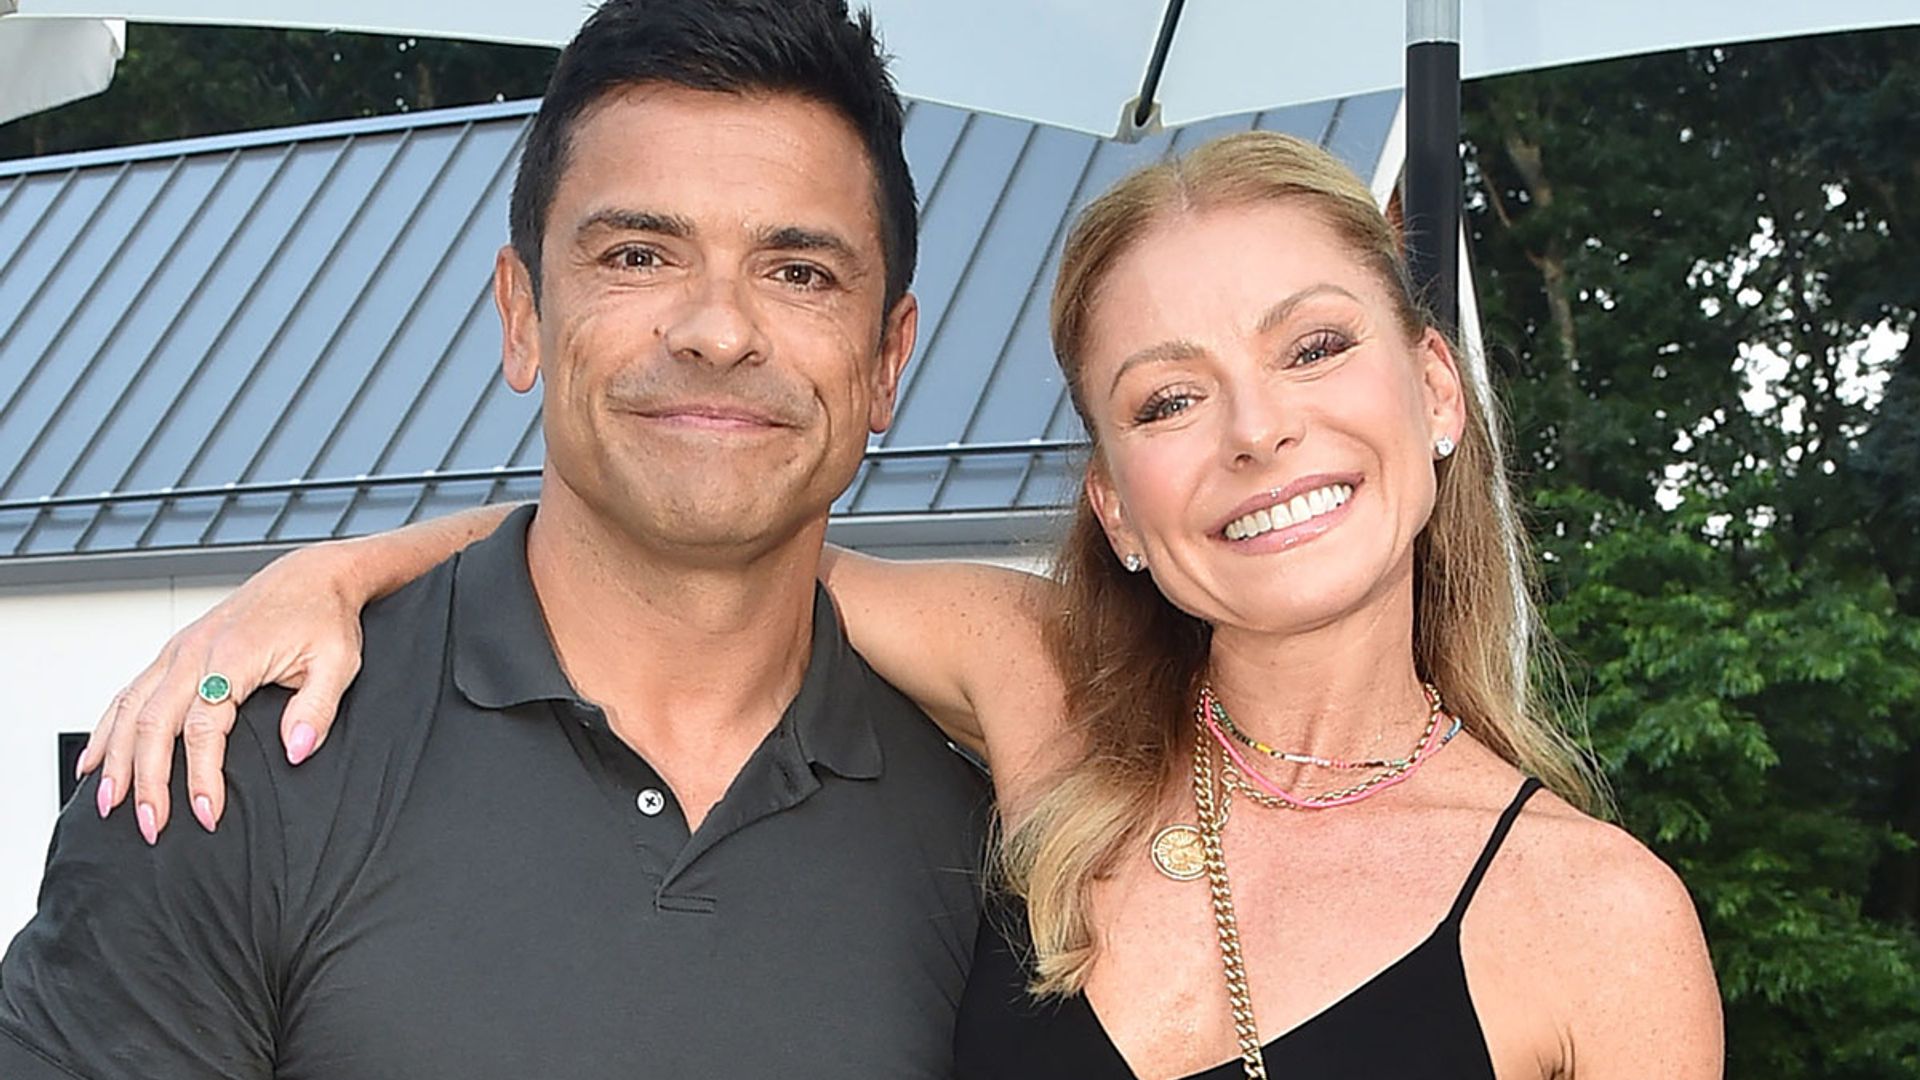 Kelly Ripa and husband Mark delight fans with loved up photo inside $27m townhouse